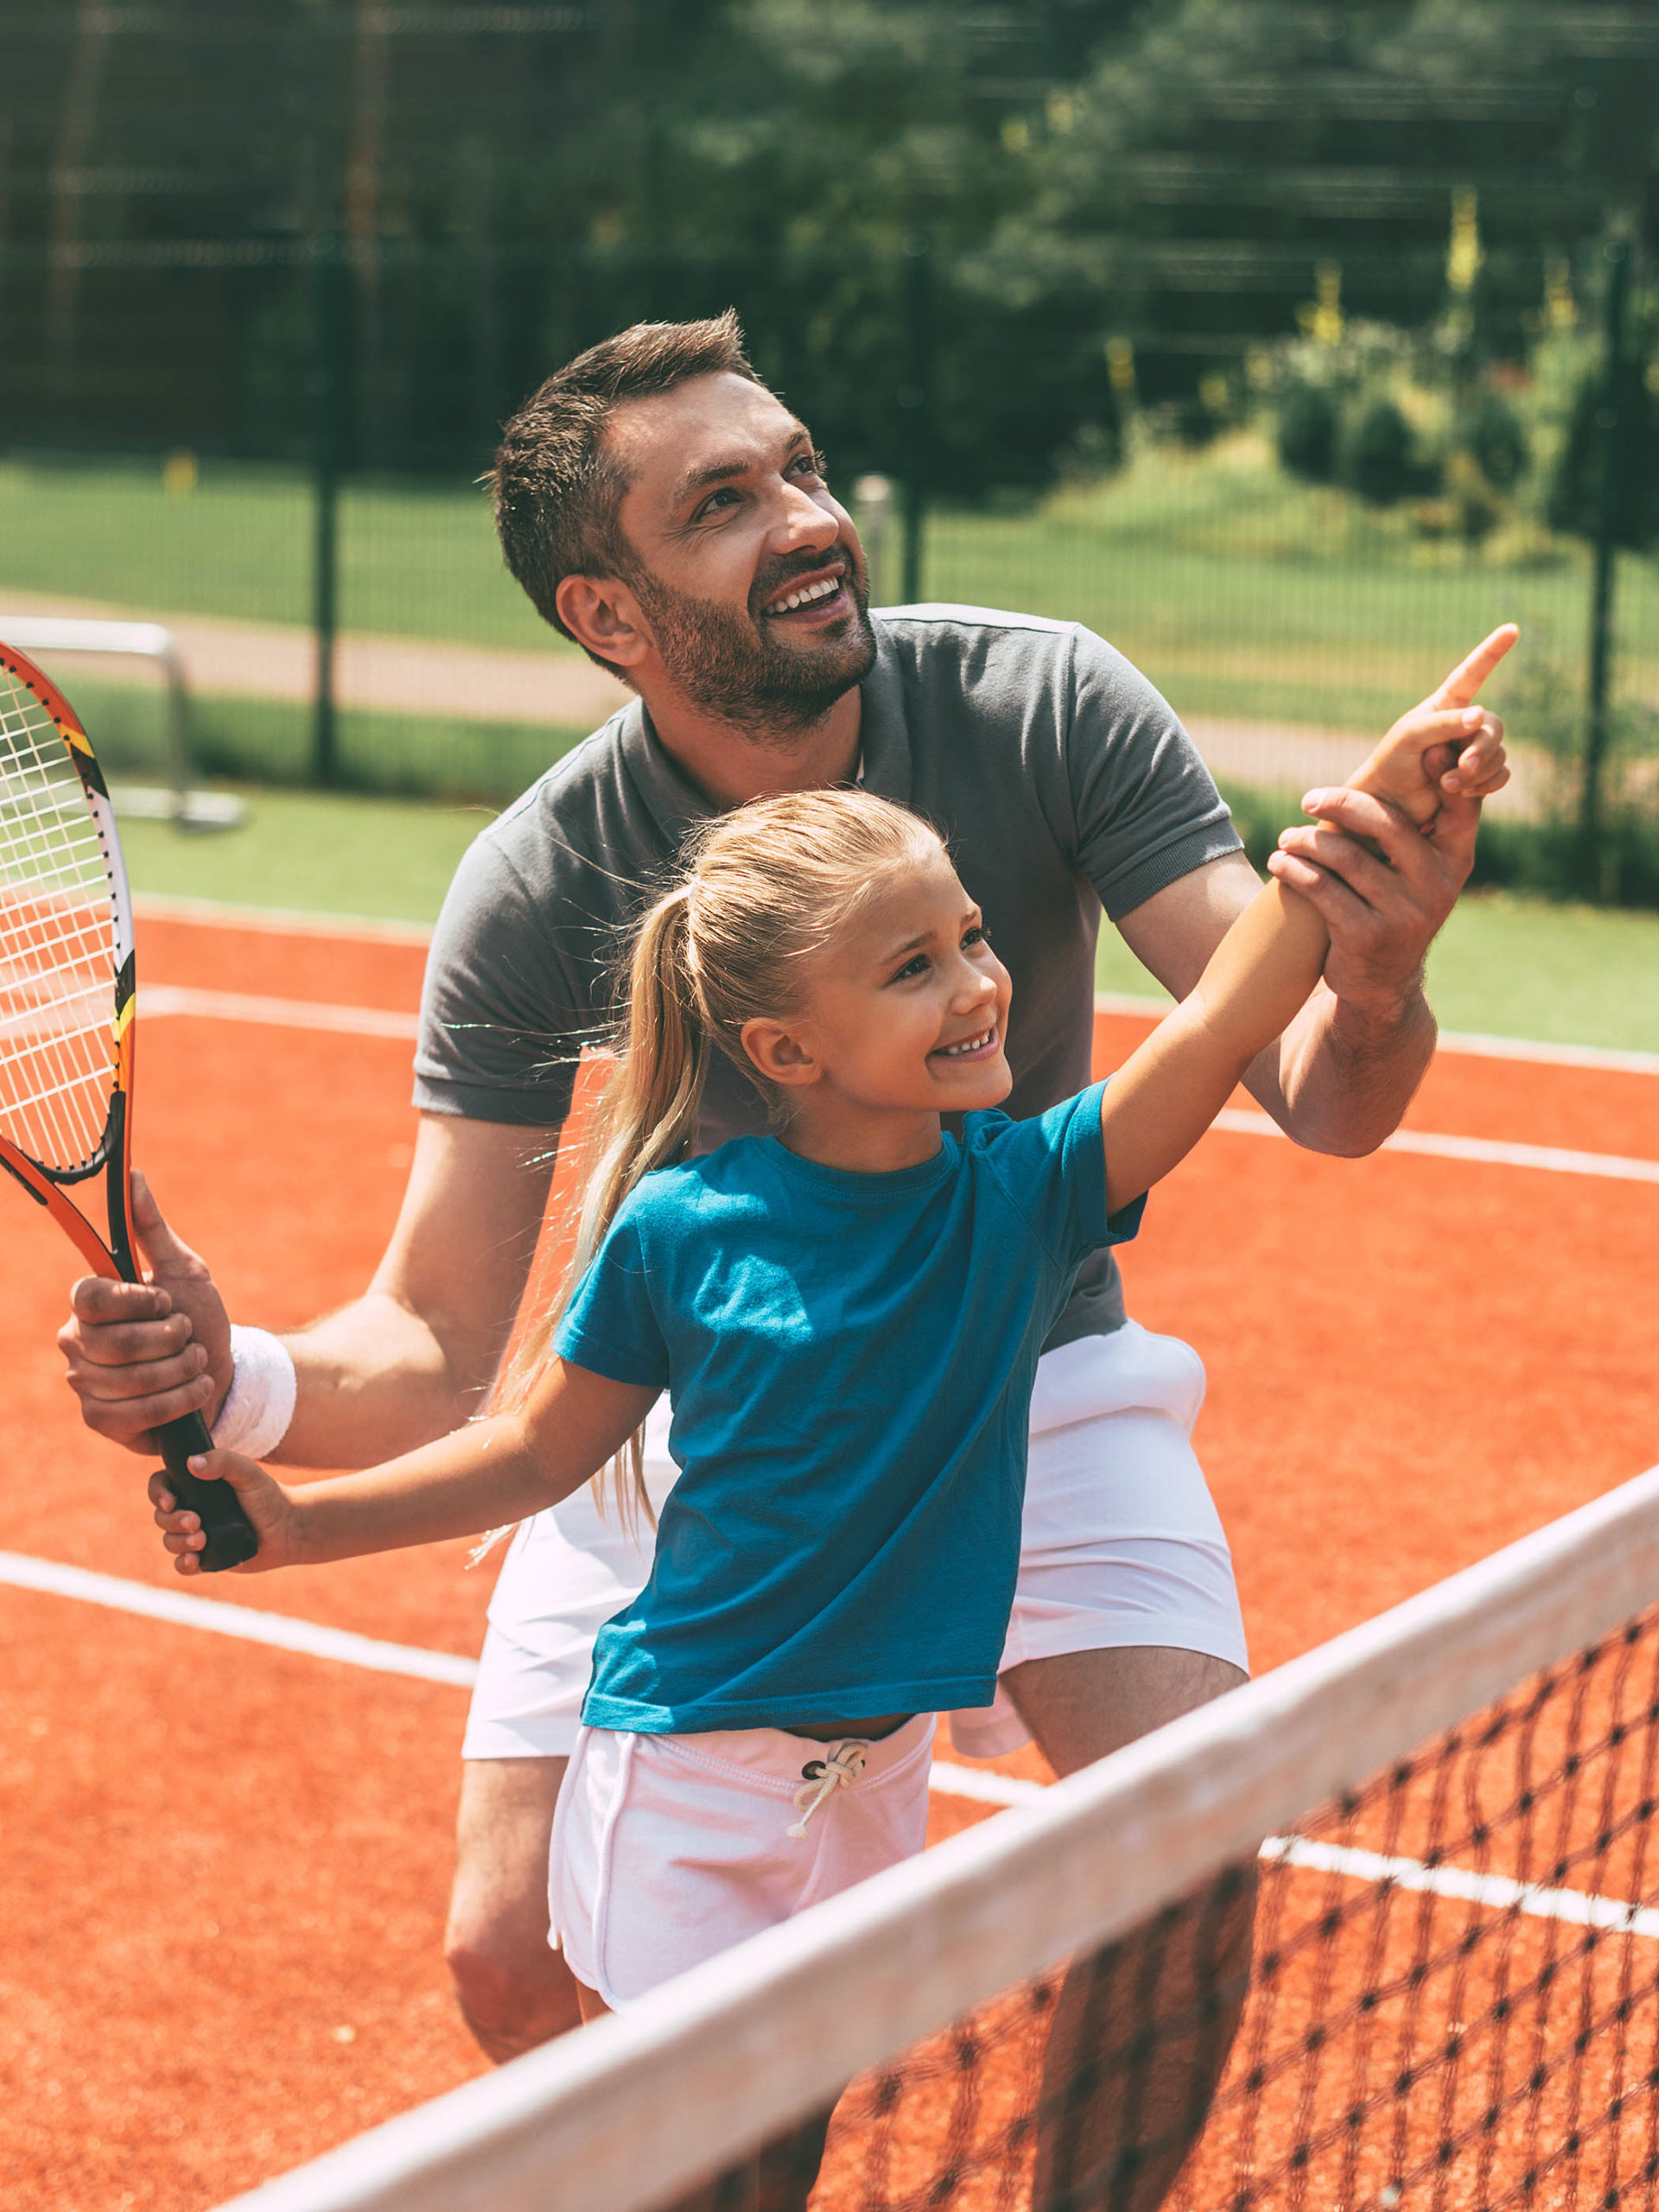 cheerful dad and daughter on tennis court, dad showing daughter how to play